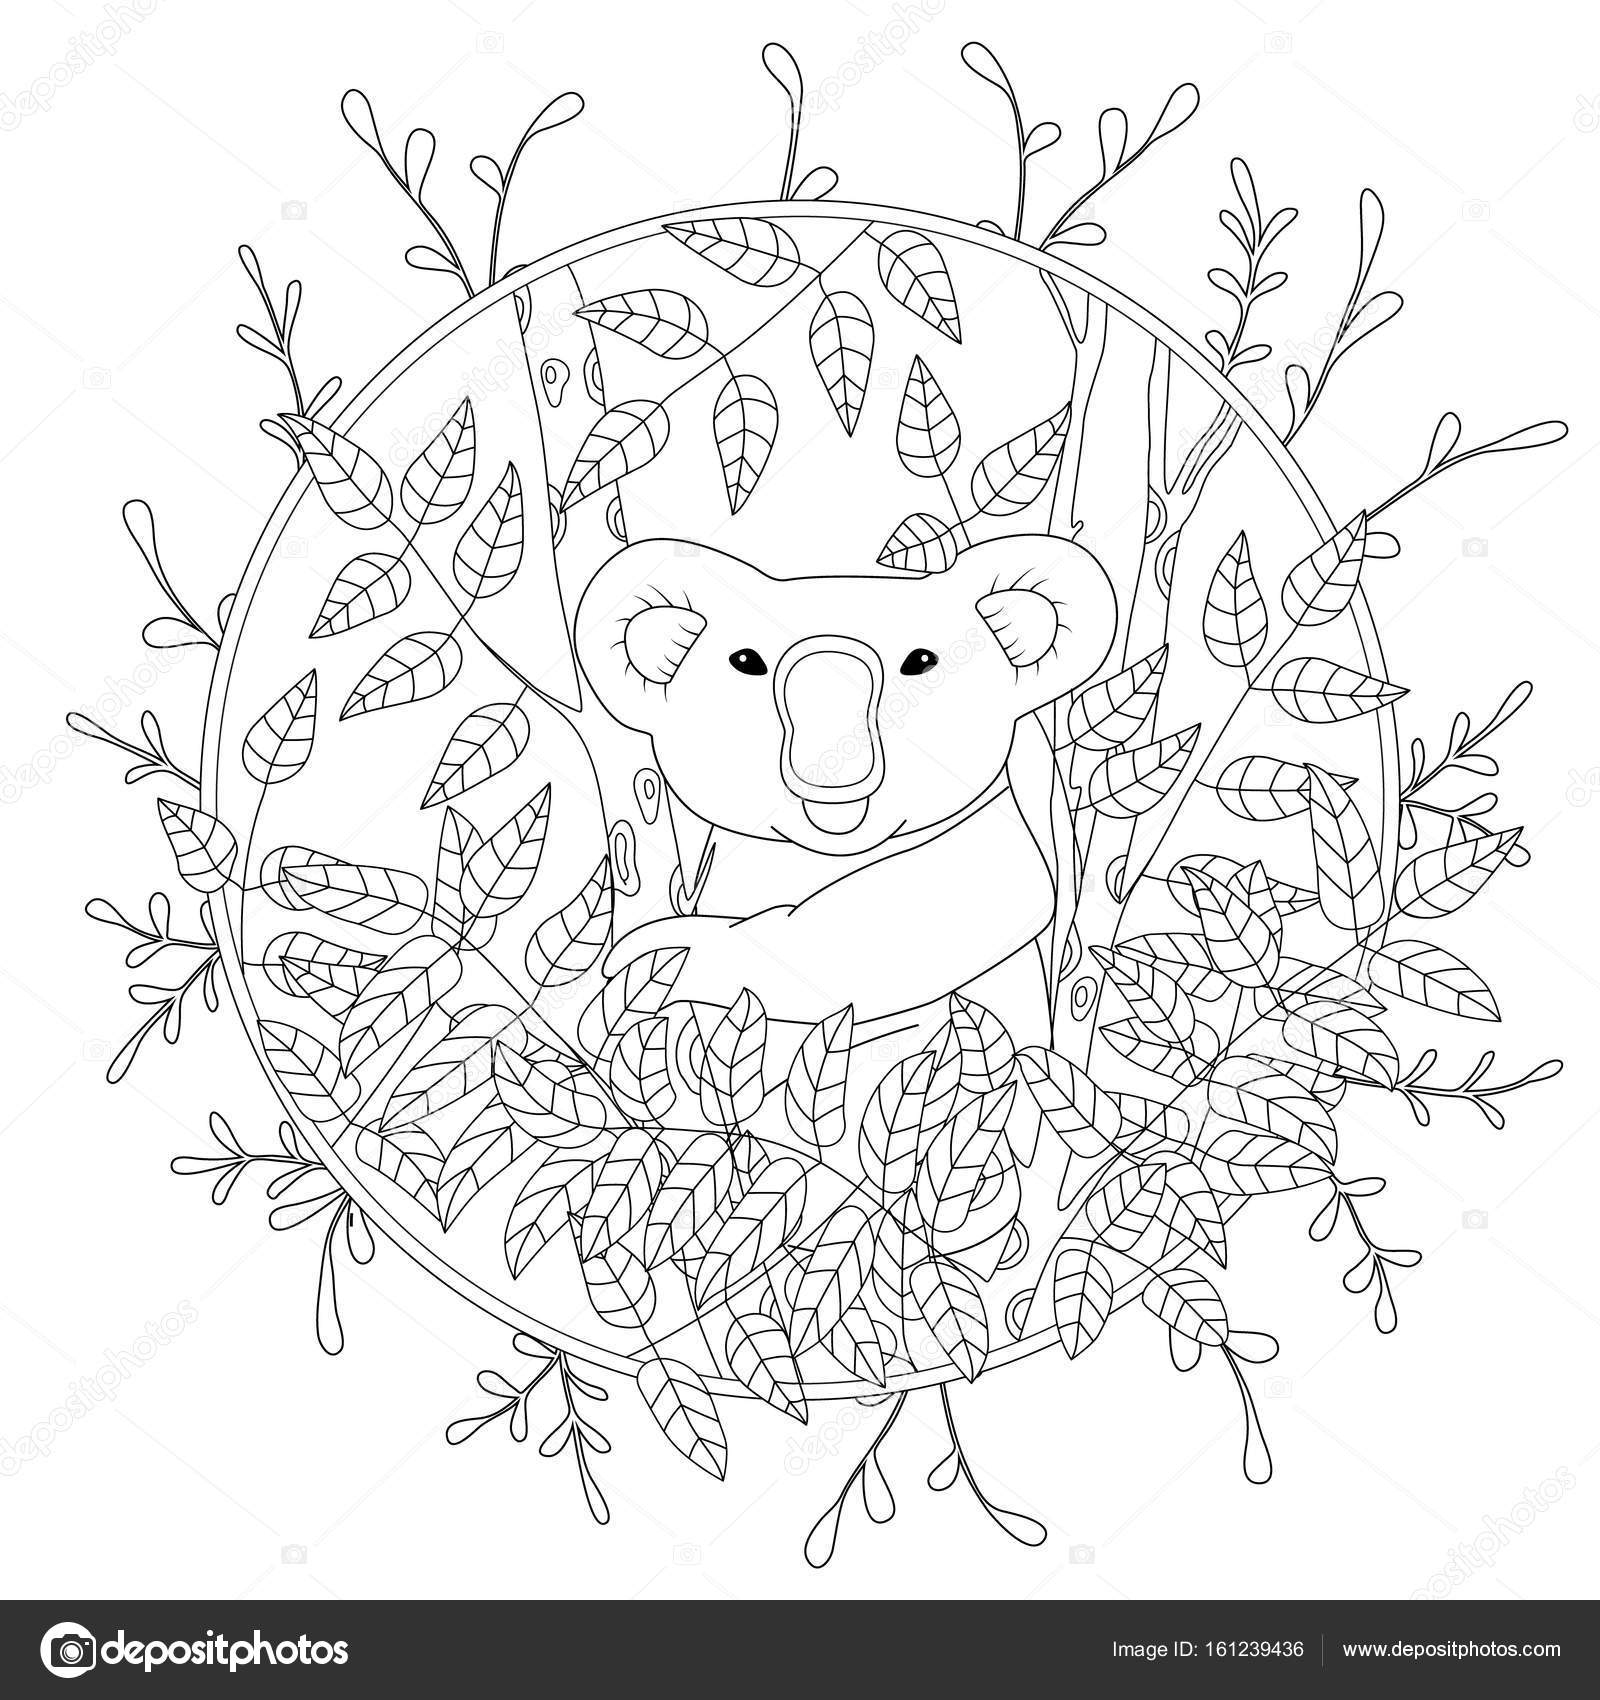 Cute vector coloring page with koala climbing on the eucalyptus tree illustration in color hand drawn in realistic style stock vector by alenkalink